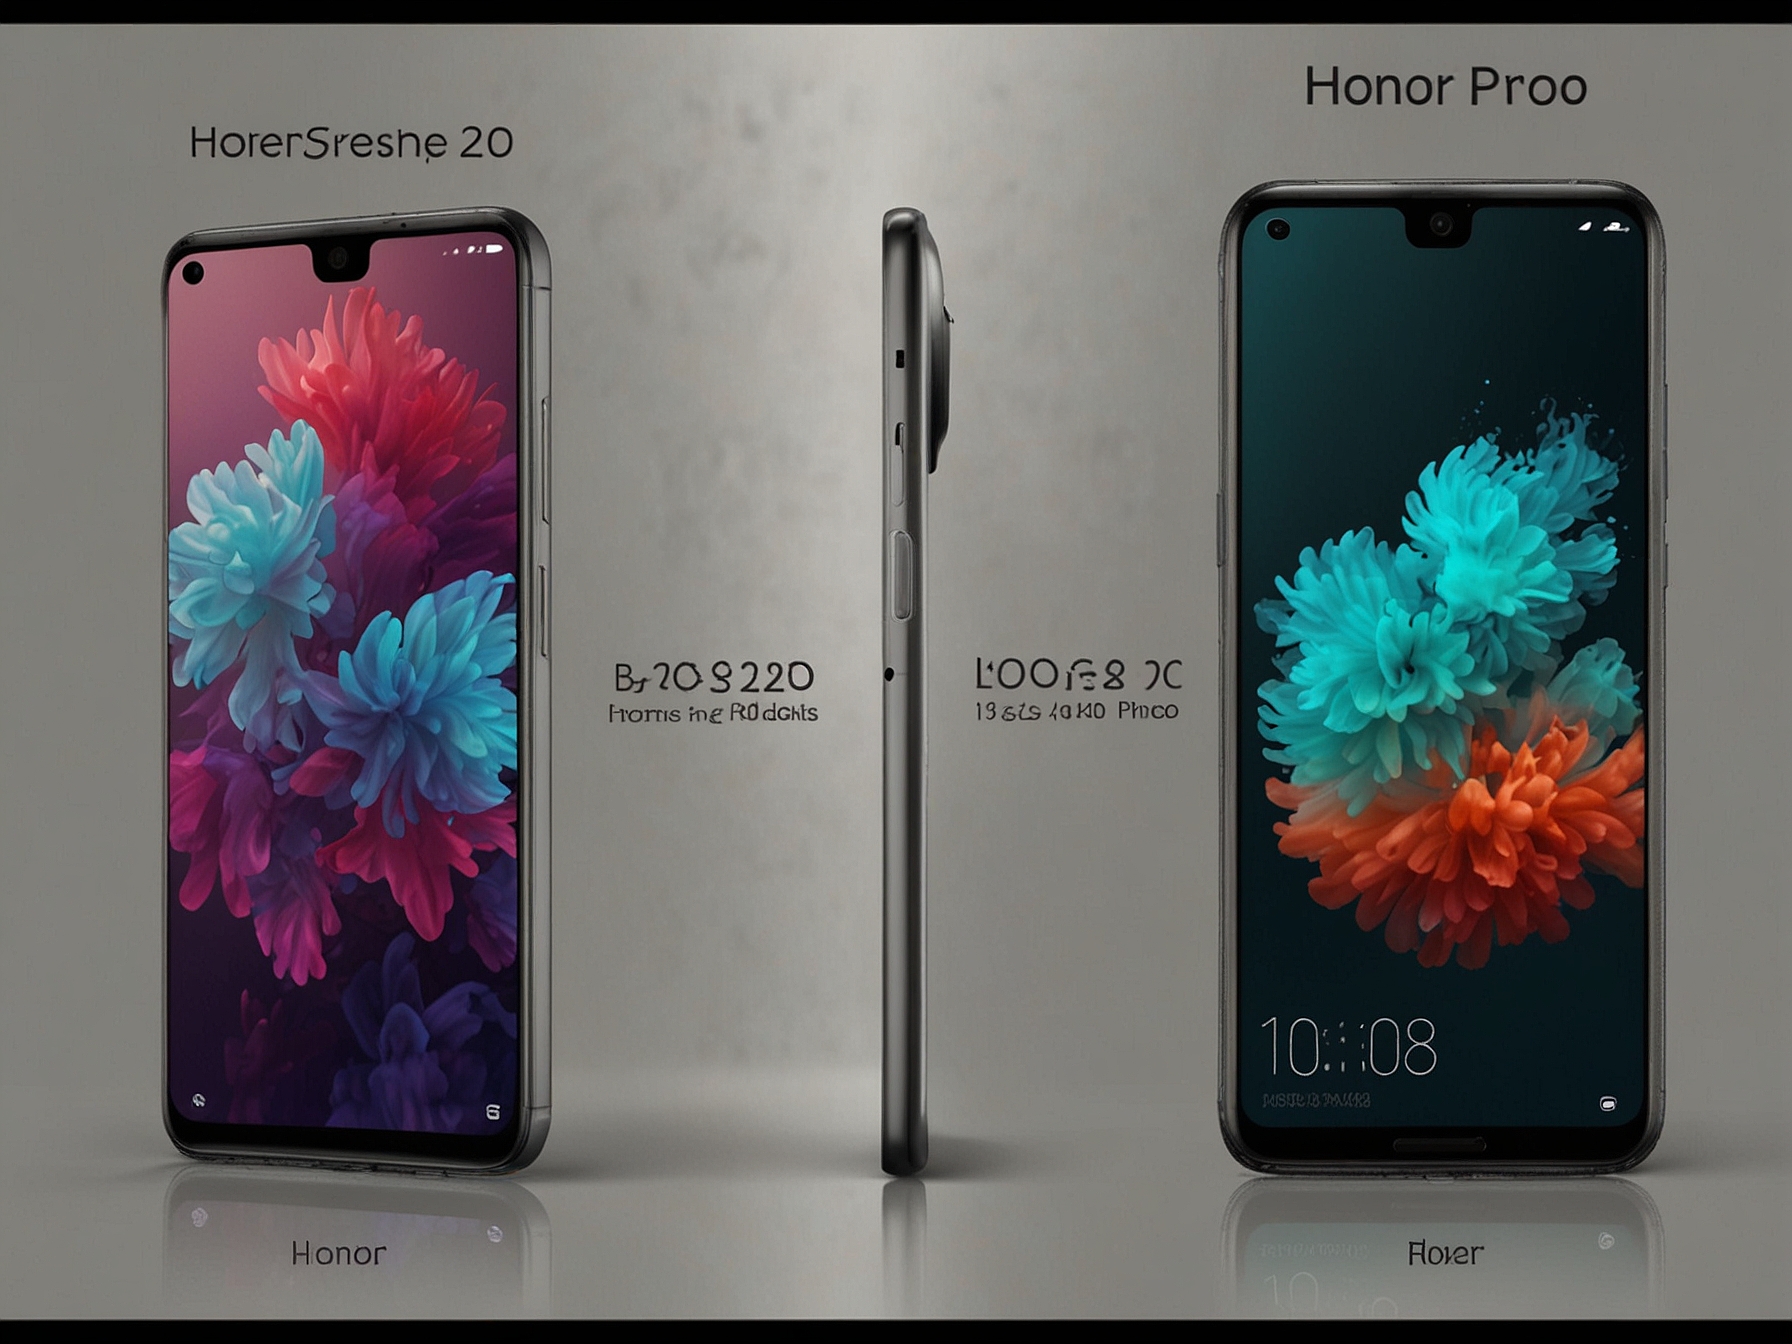 A side-by-side comparison image of the Honor 200 and Honor 200 Pro, highlighting the key features of each model, including their design, camera systems, and display quality.